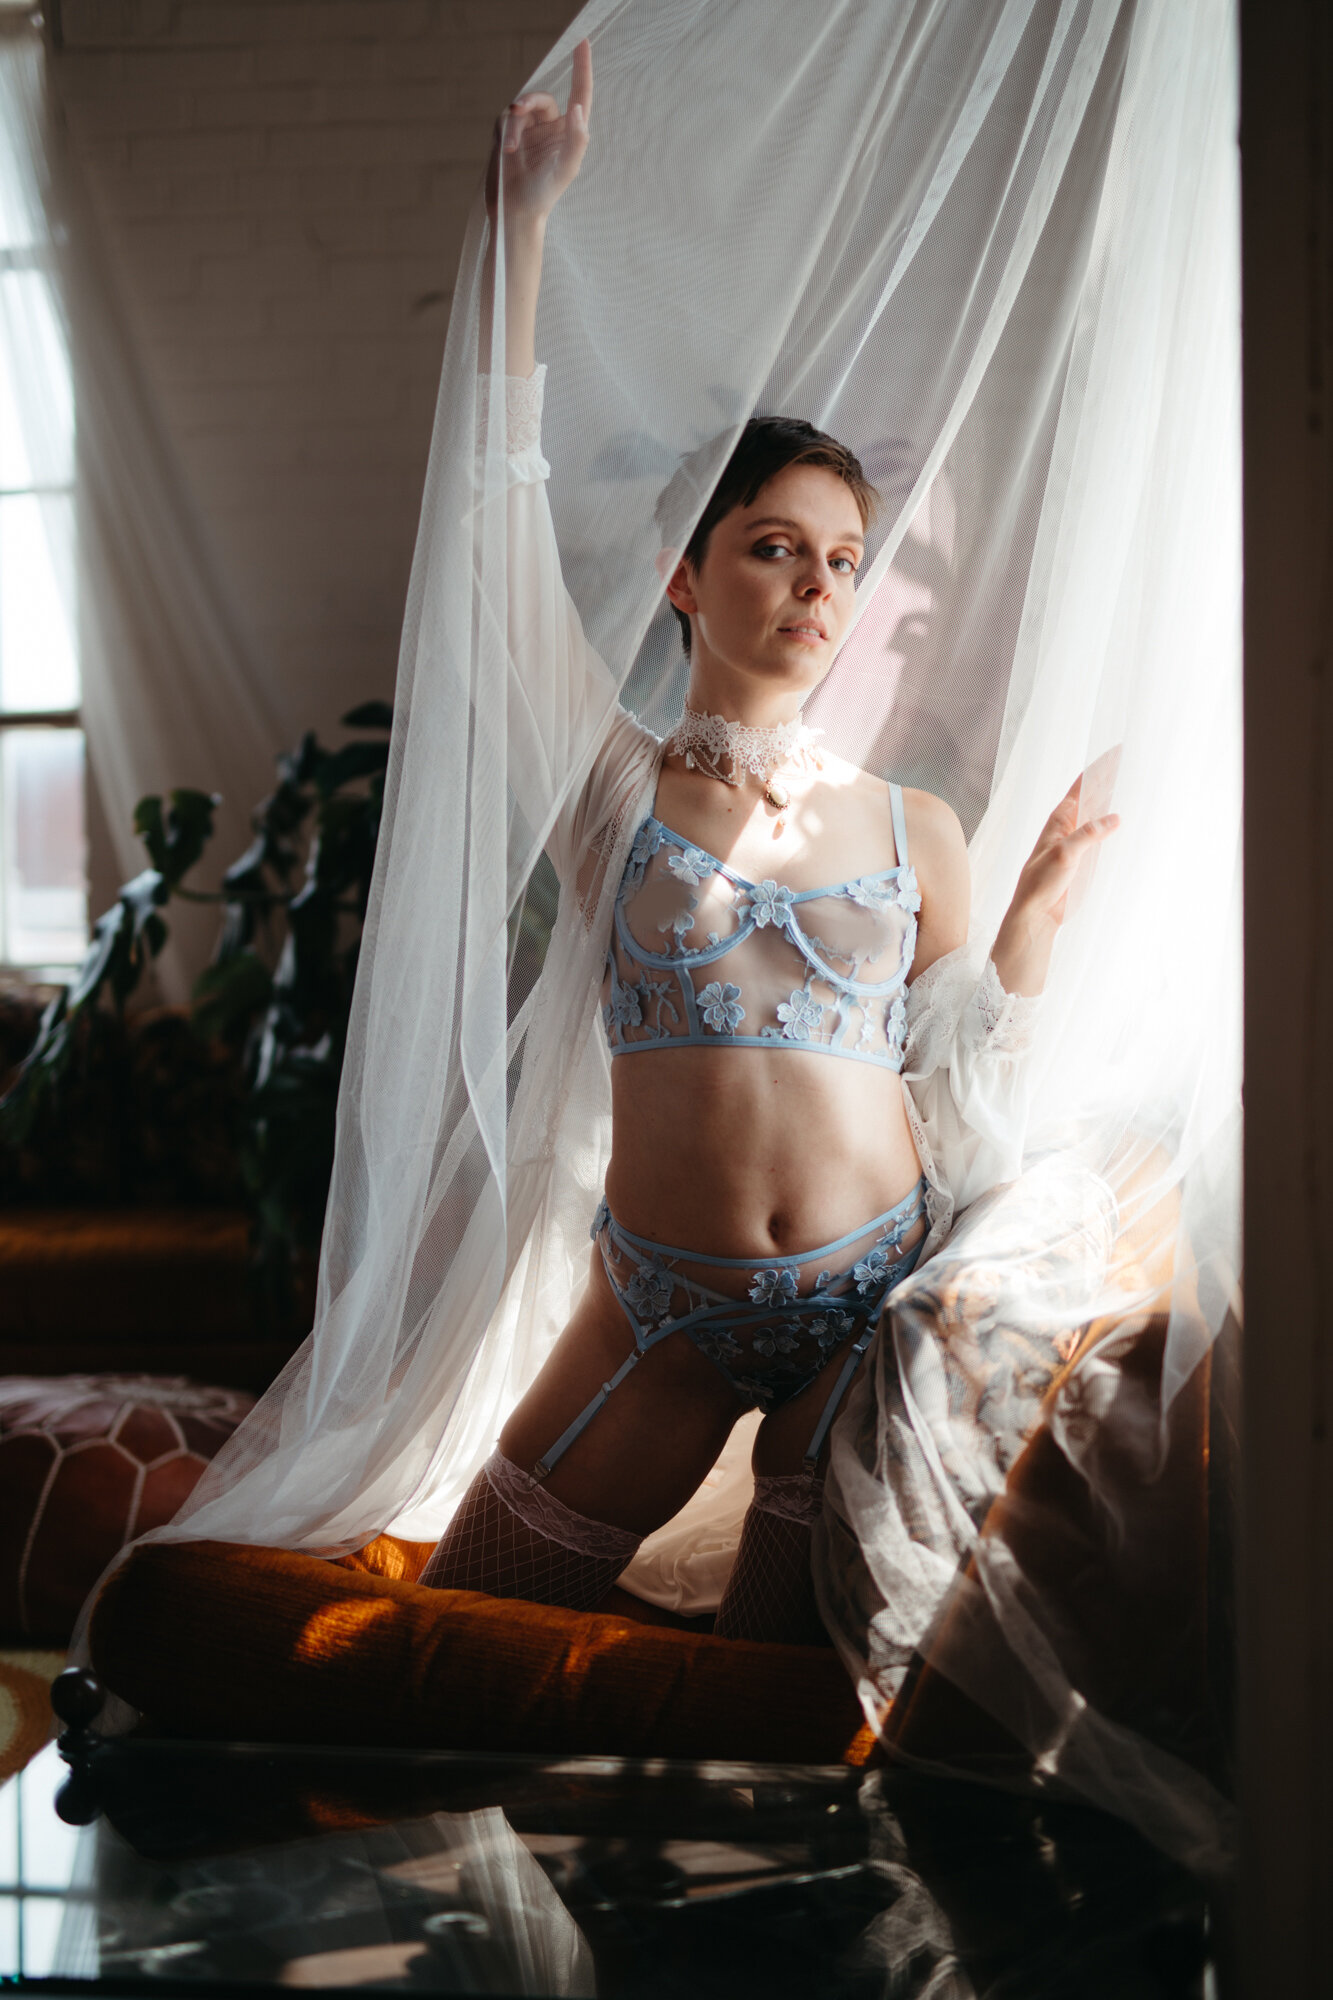 Queer boudoir photo of person with short hair in lingerie set draped in sheer fabric